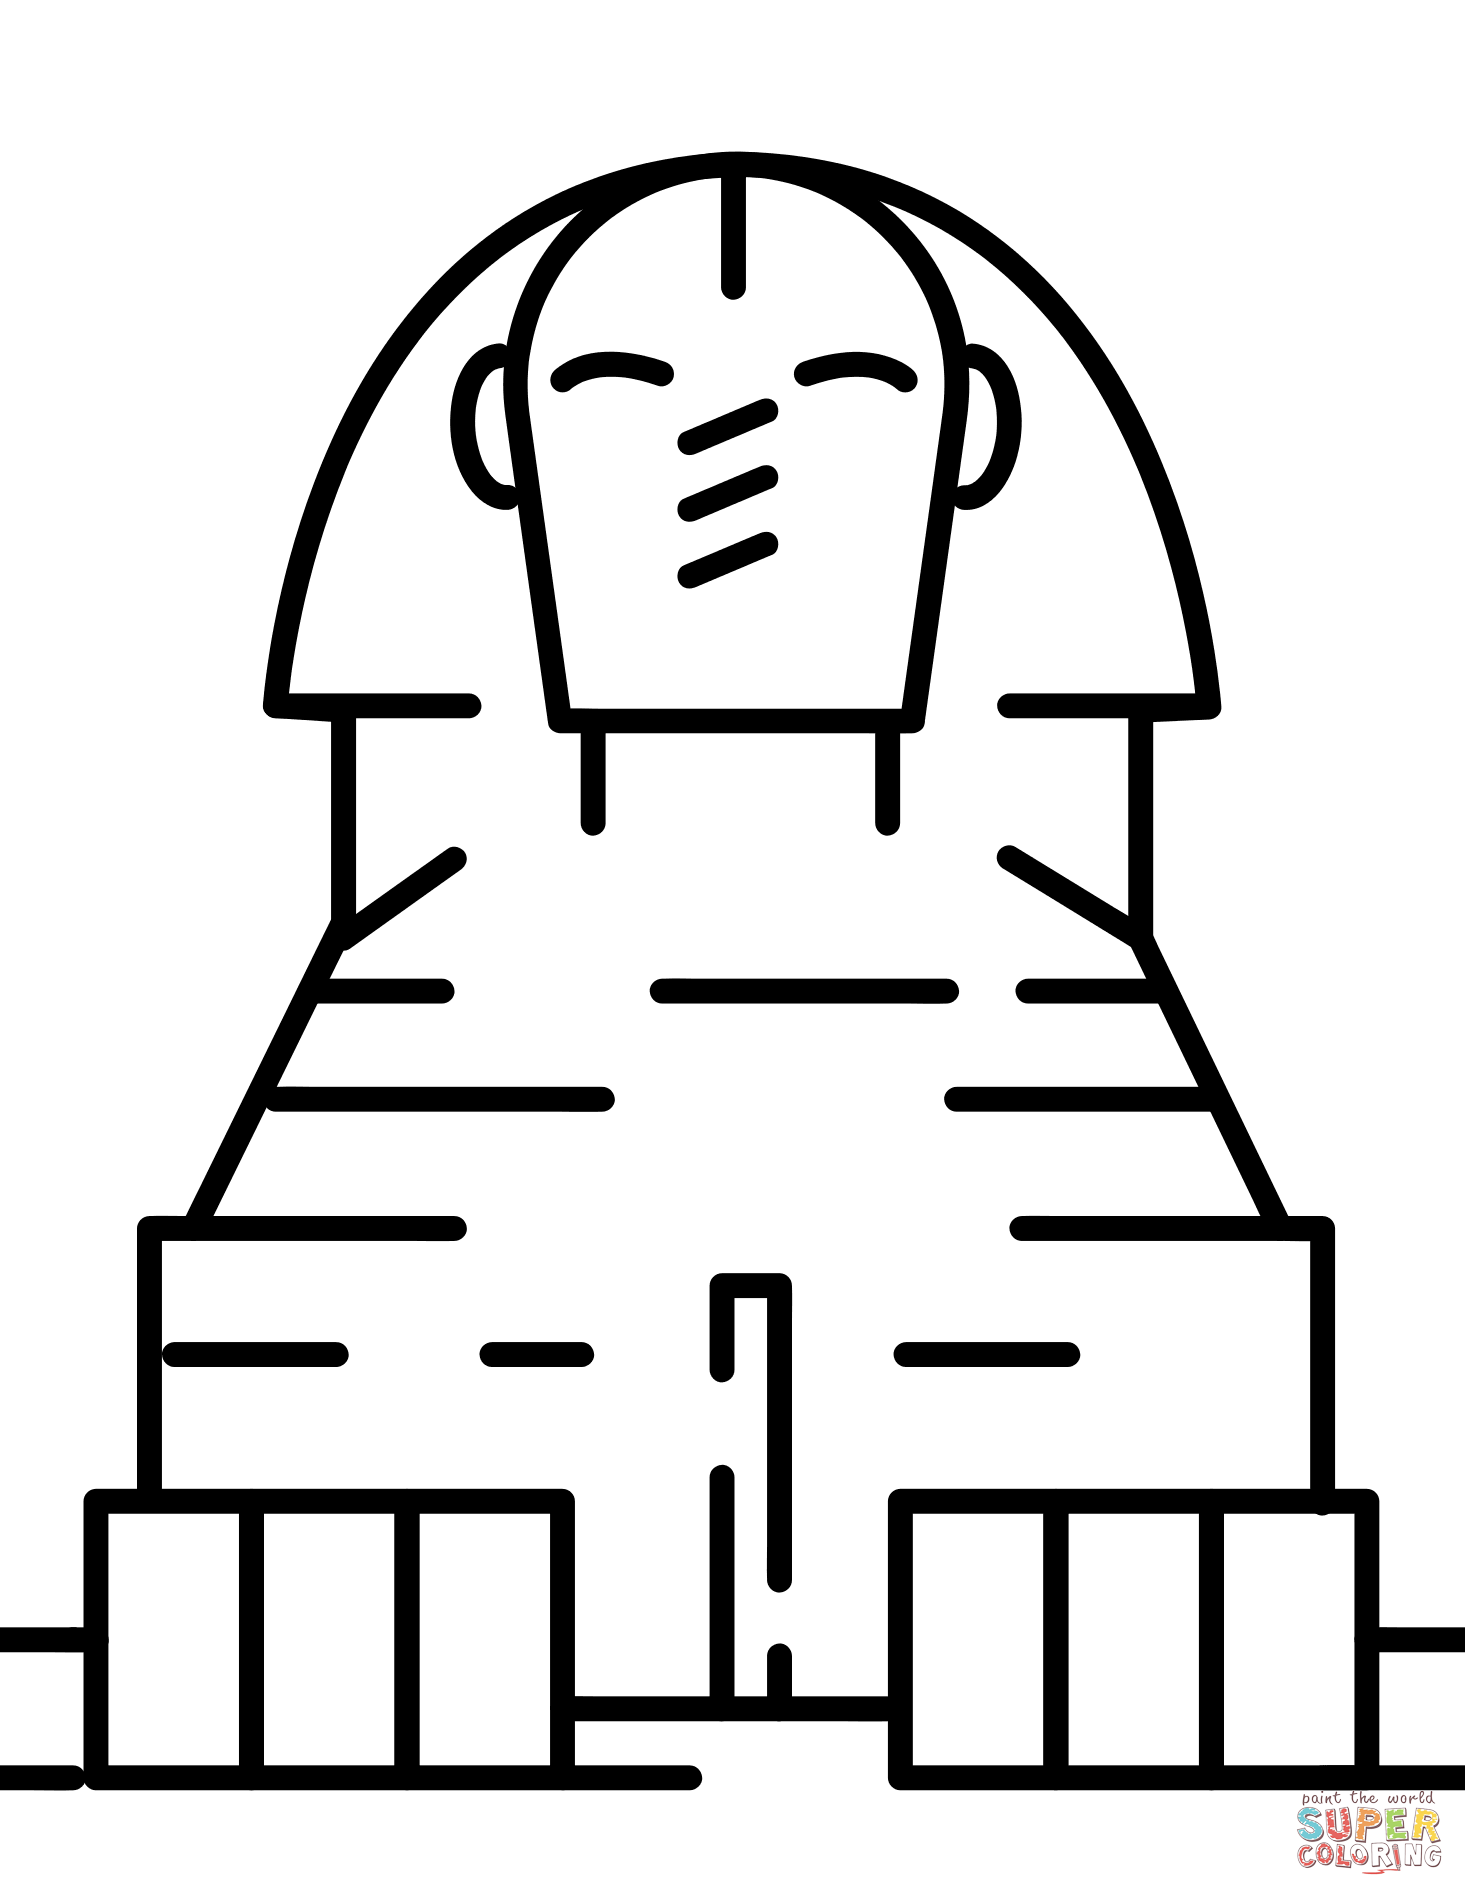 Sphinx coloring page | Free Printable Coloring Pages